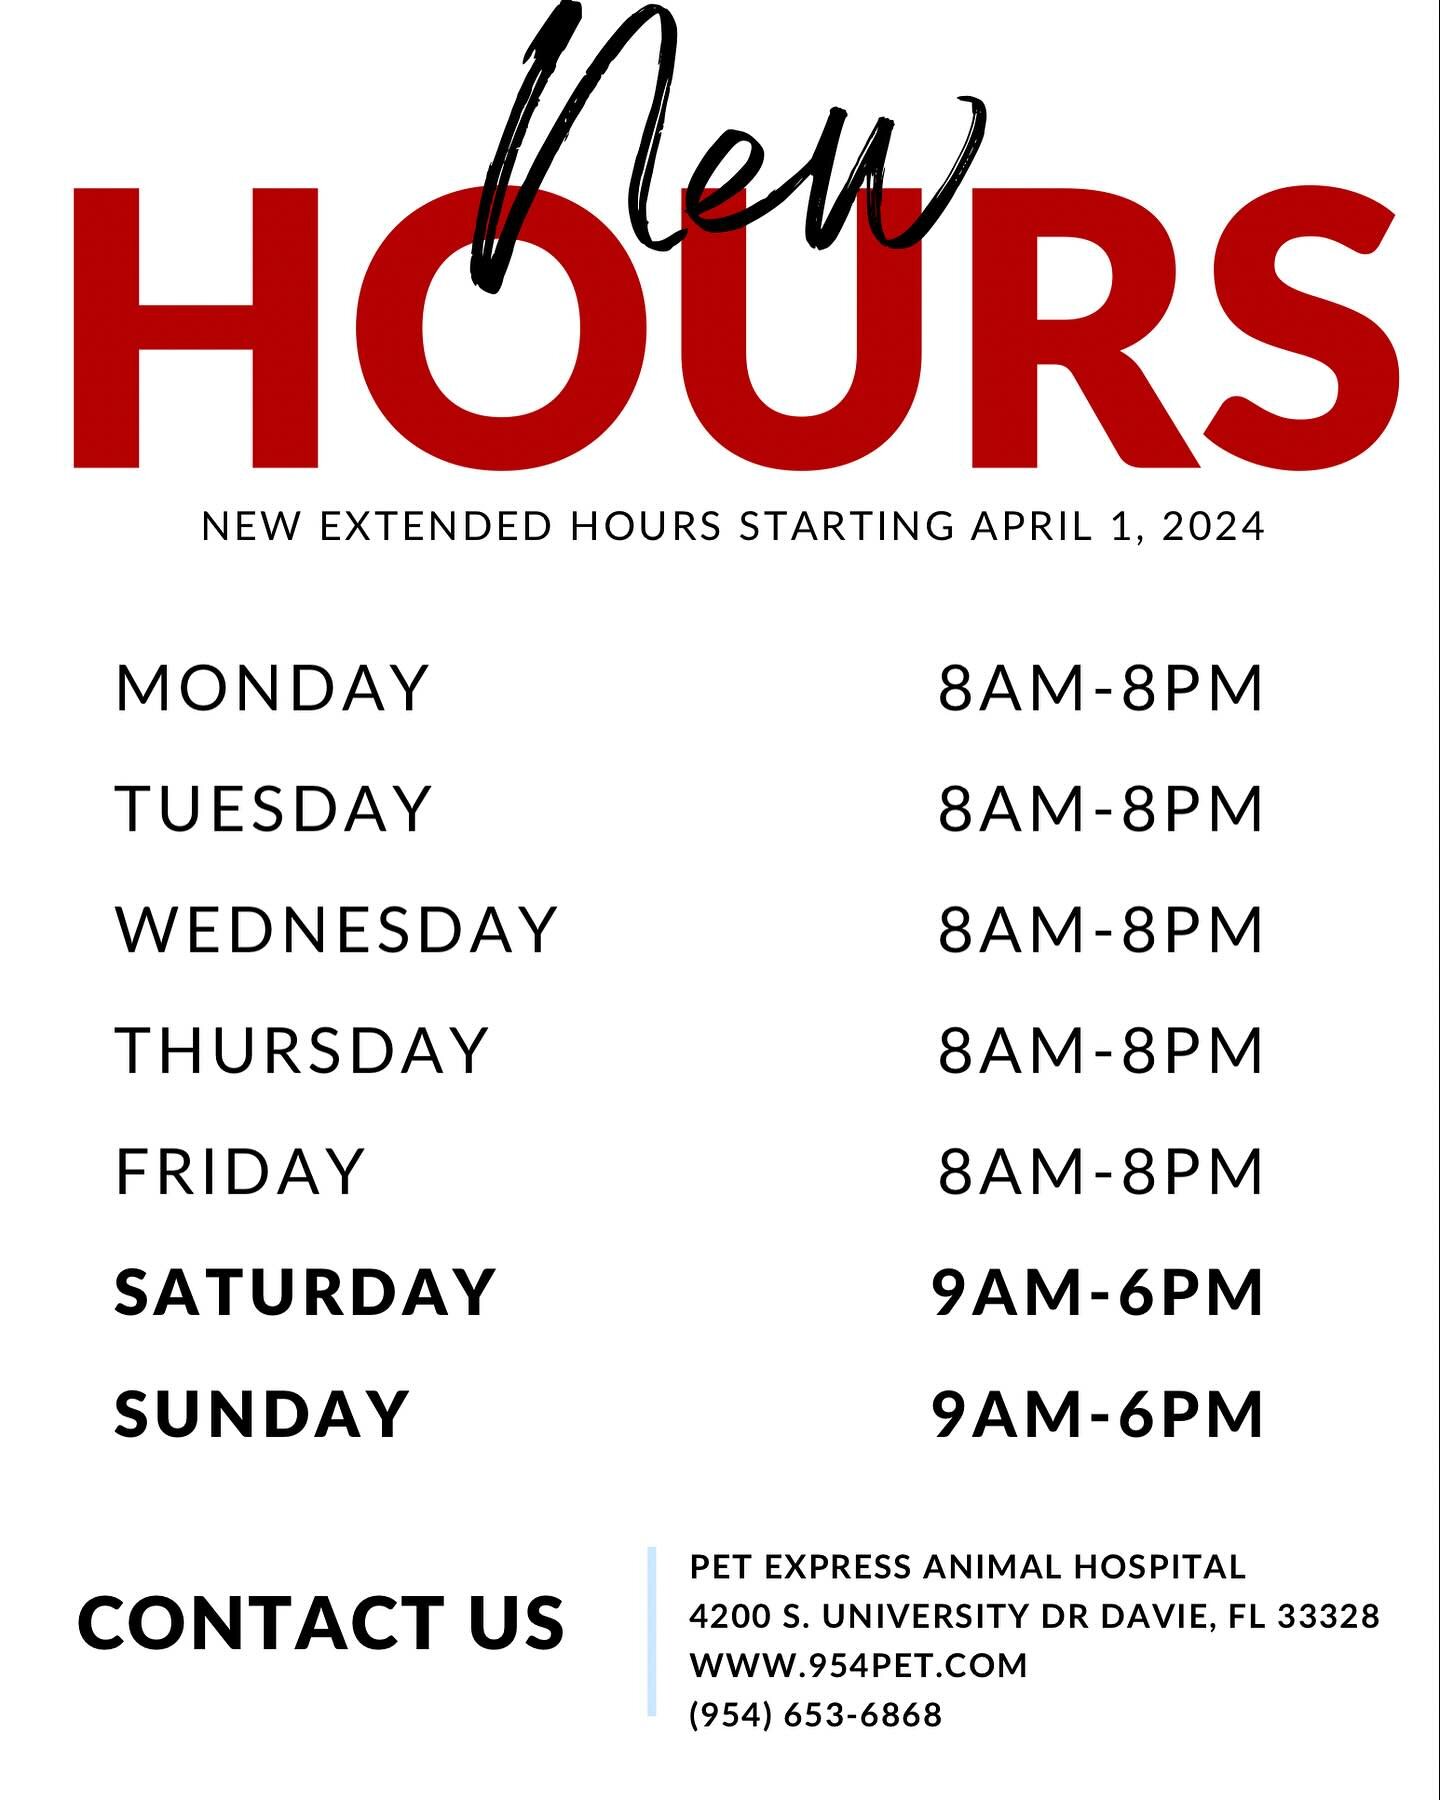 We are growing and expanding! We are finally opening more hours! Big news on the rise!